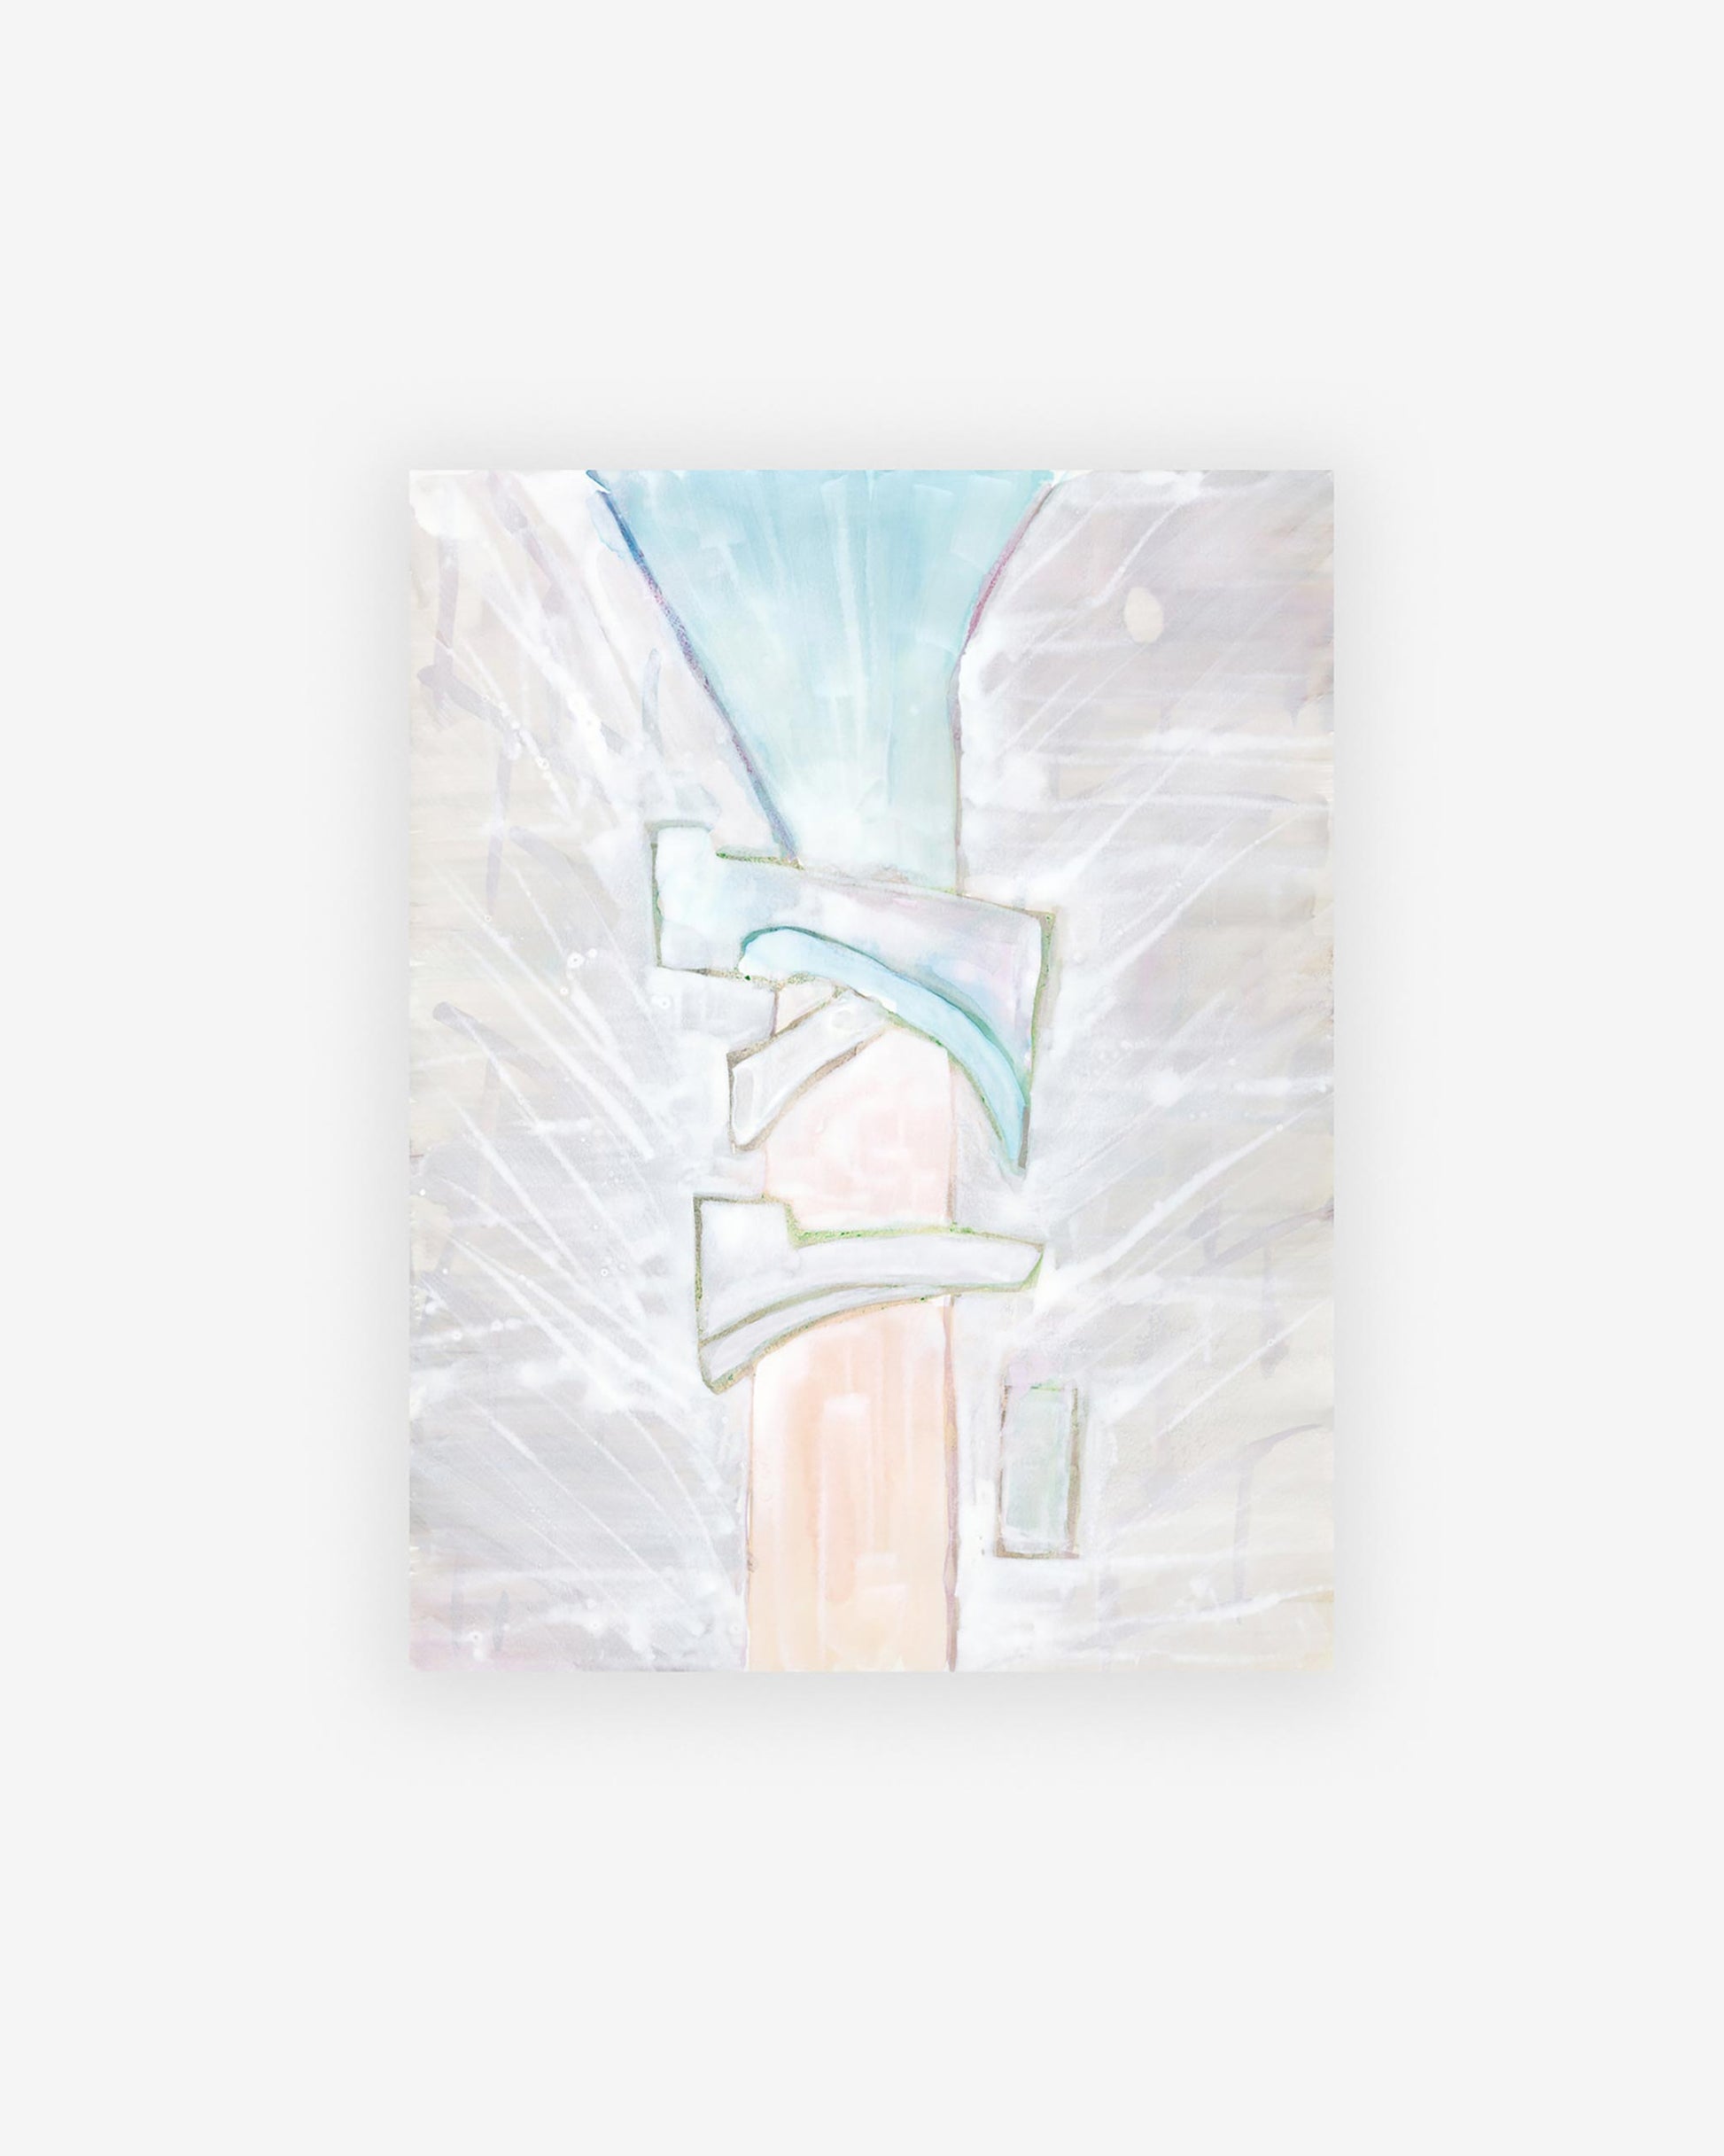 An original artwork by the Eskayel founder, the Sky Arc Print 17" x 22" features a blue and white background